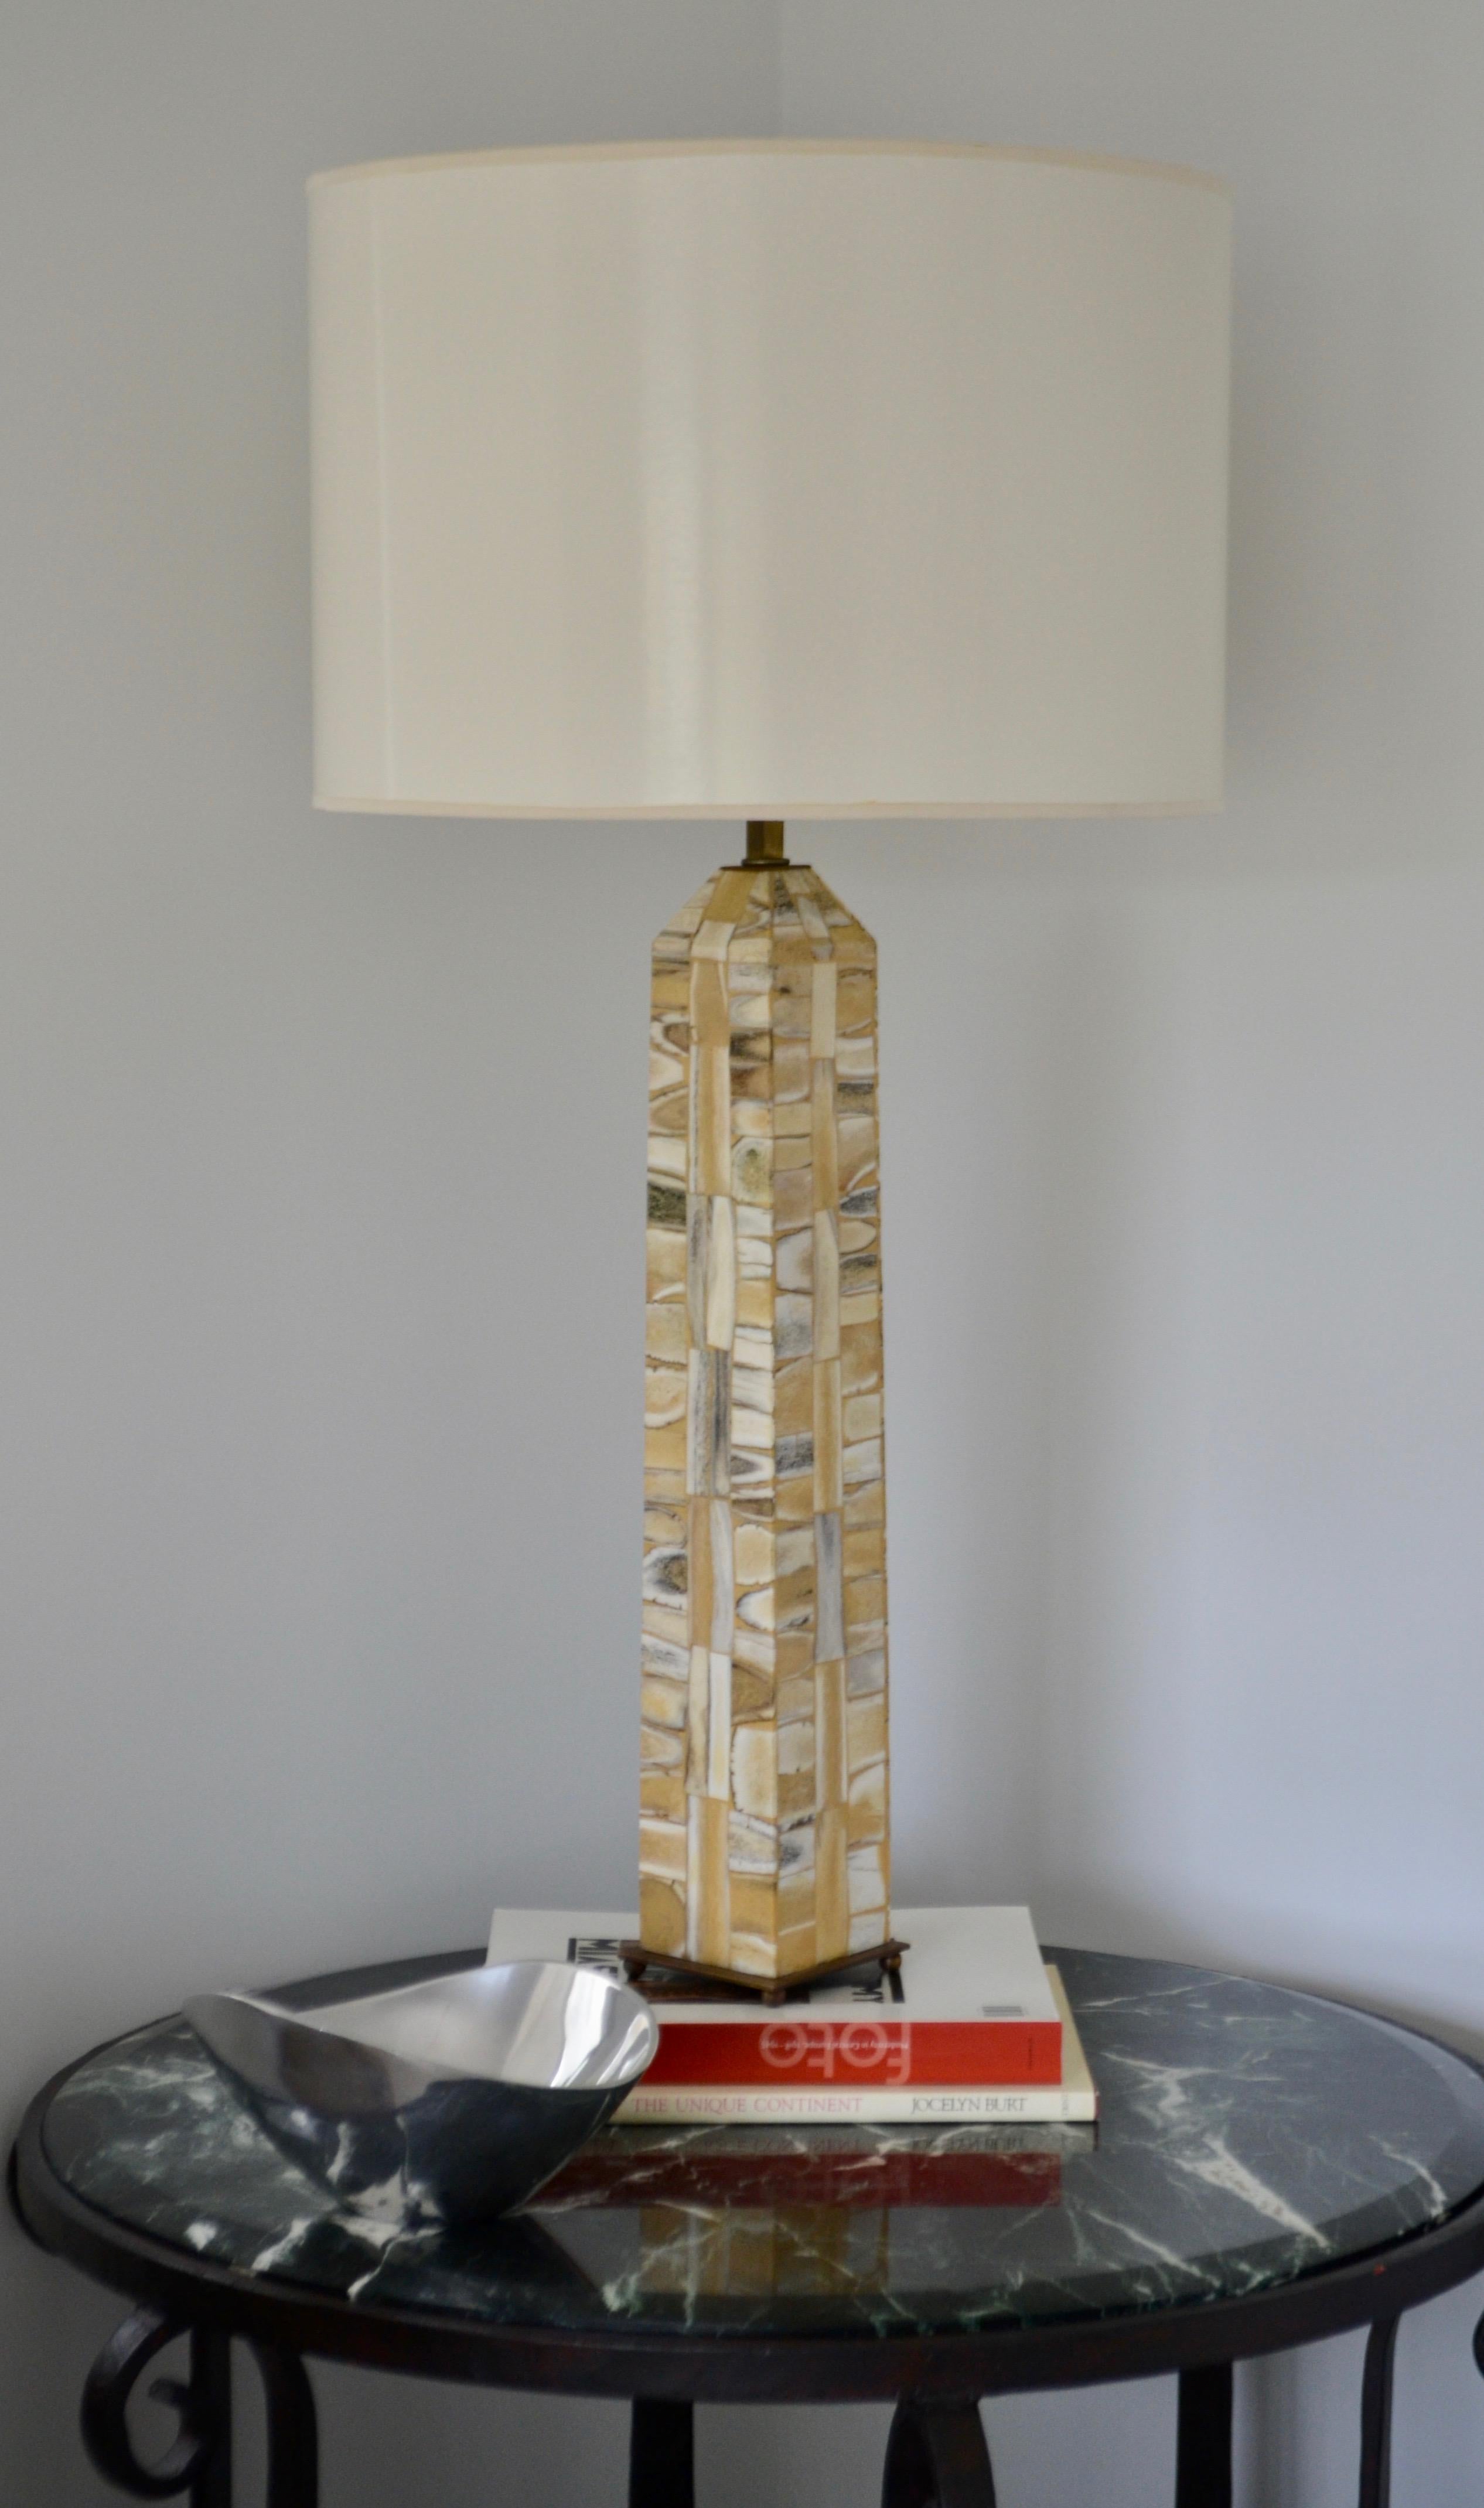 Glamorous midcentury organic patterned obelisk form table lamp mounted on a brass platform base with ball feet, circa 1960s-1970s. Shade not included.
Measurements: 36.5